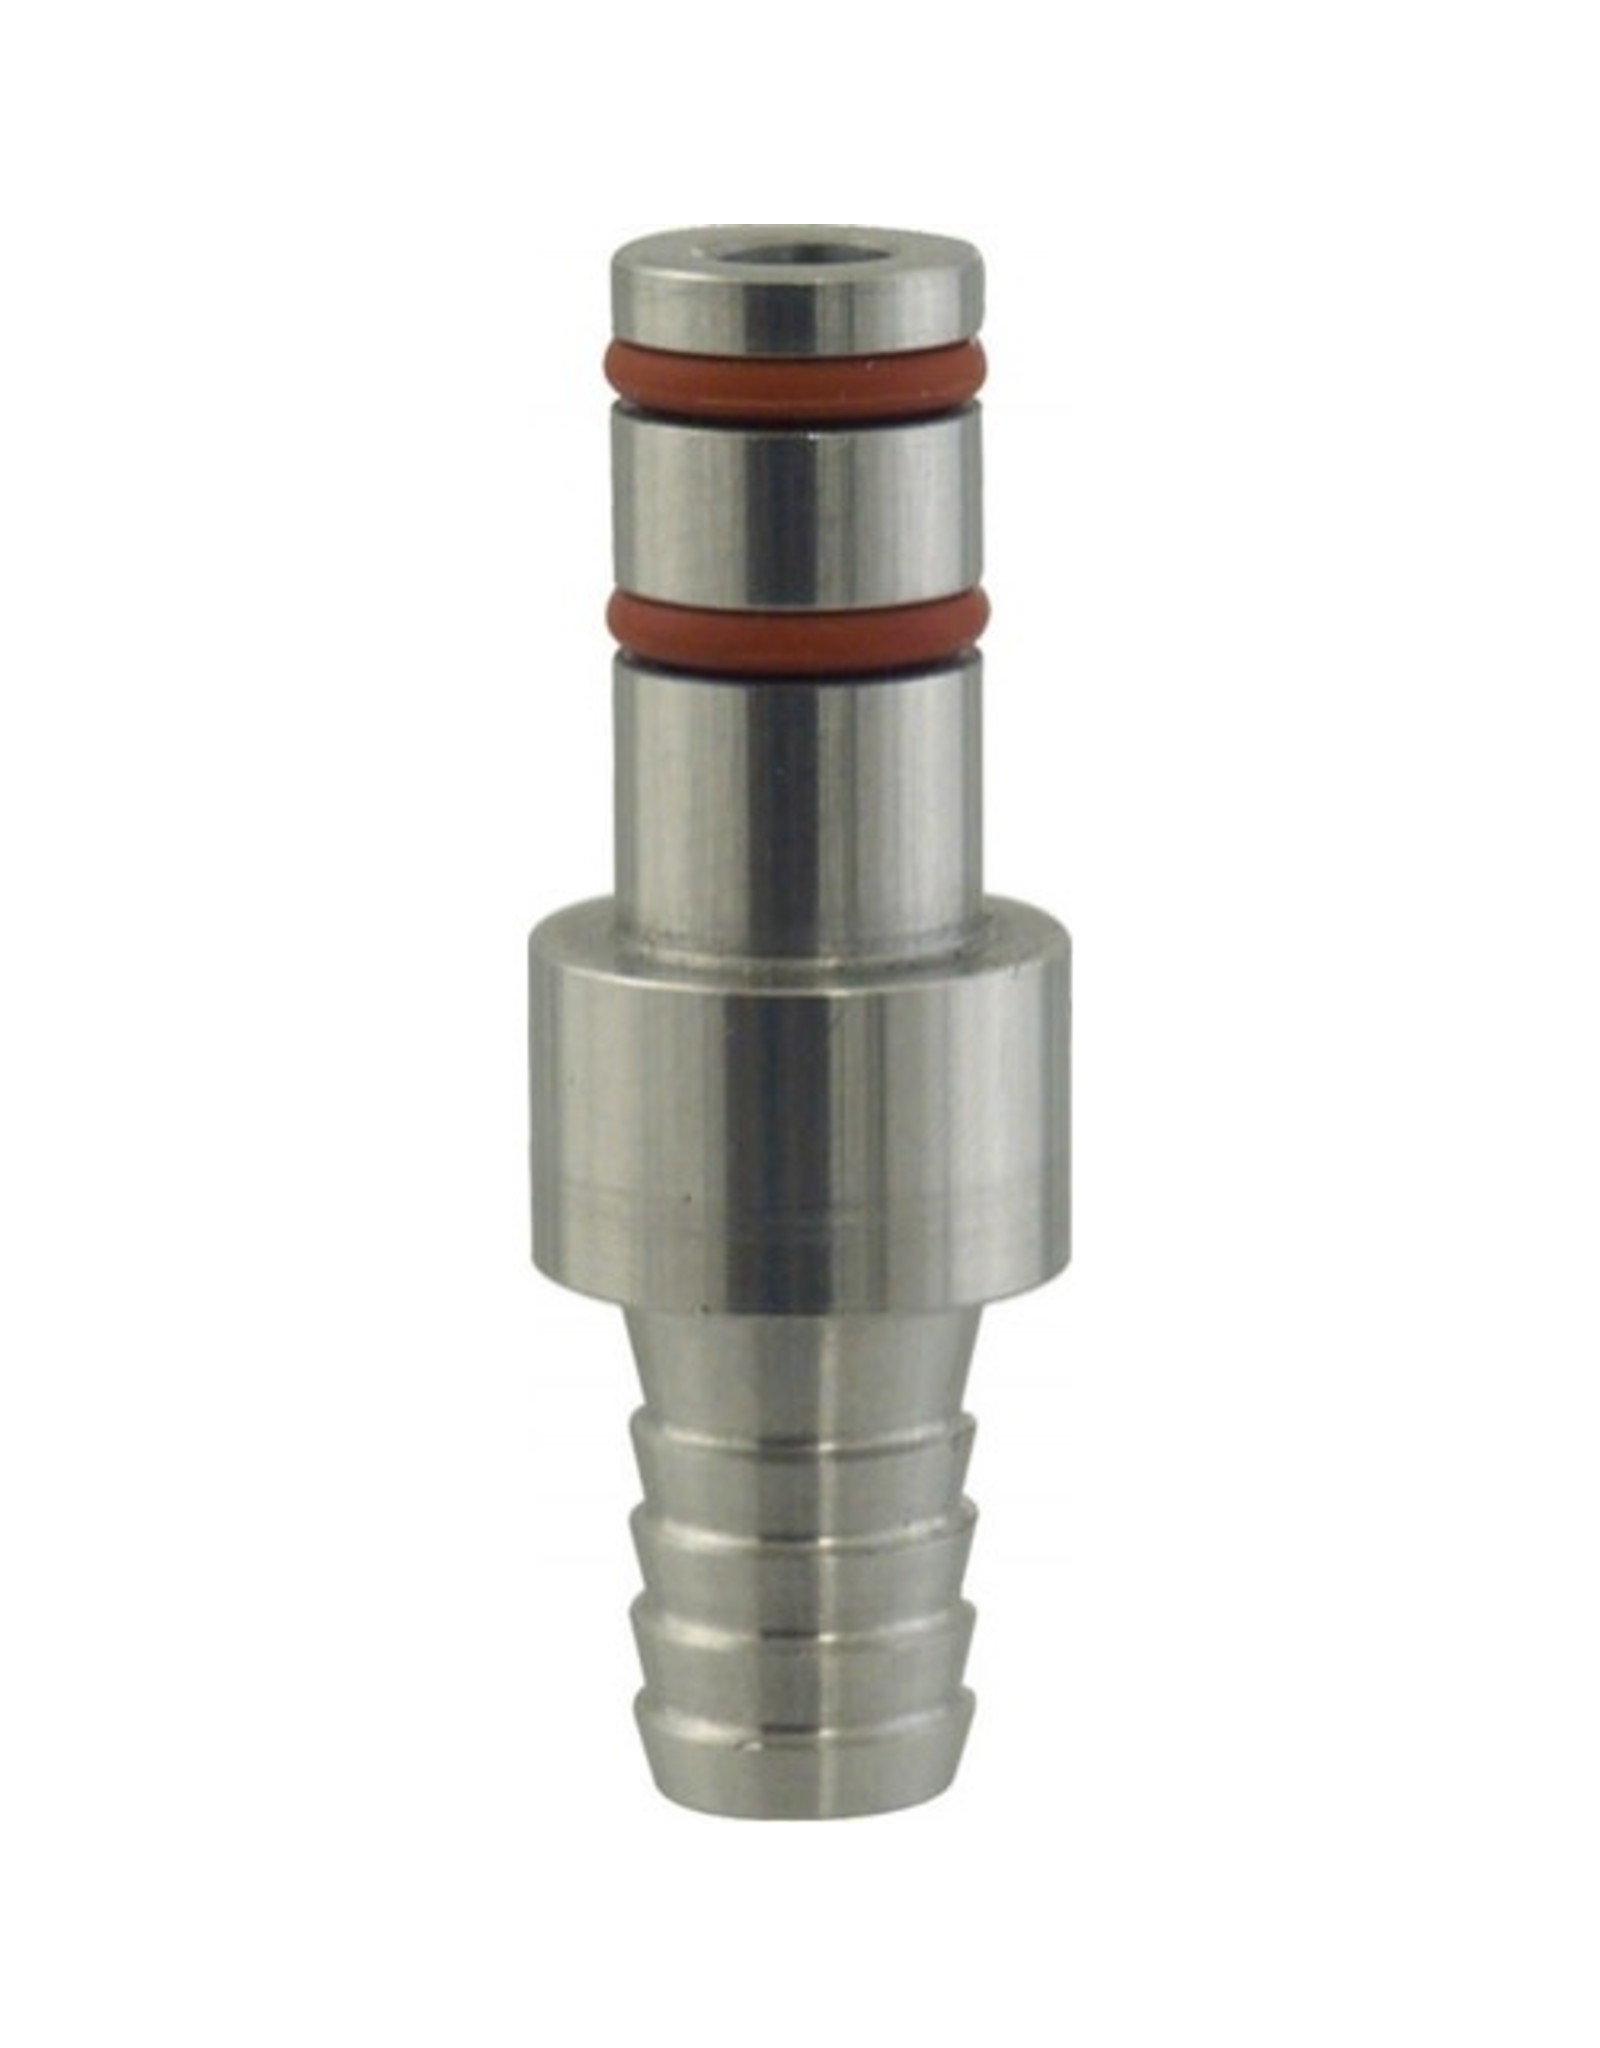 Growler filler Krome Faucets (stainless steel)